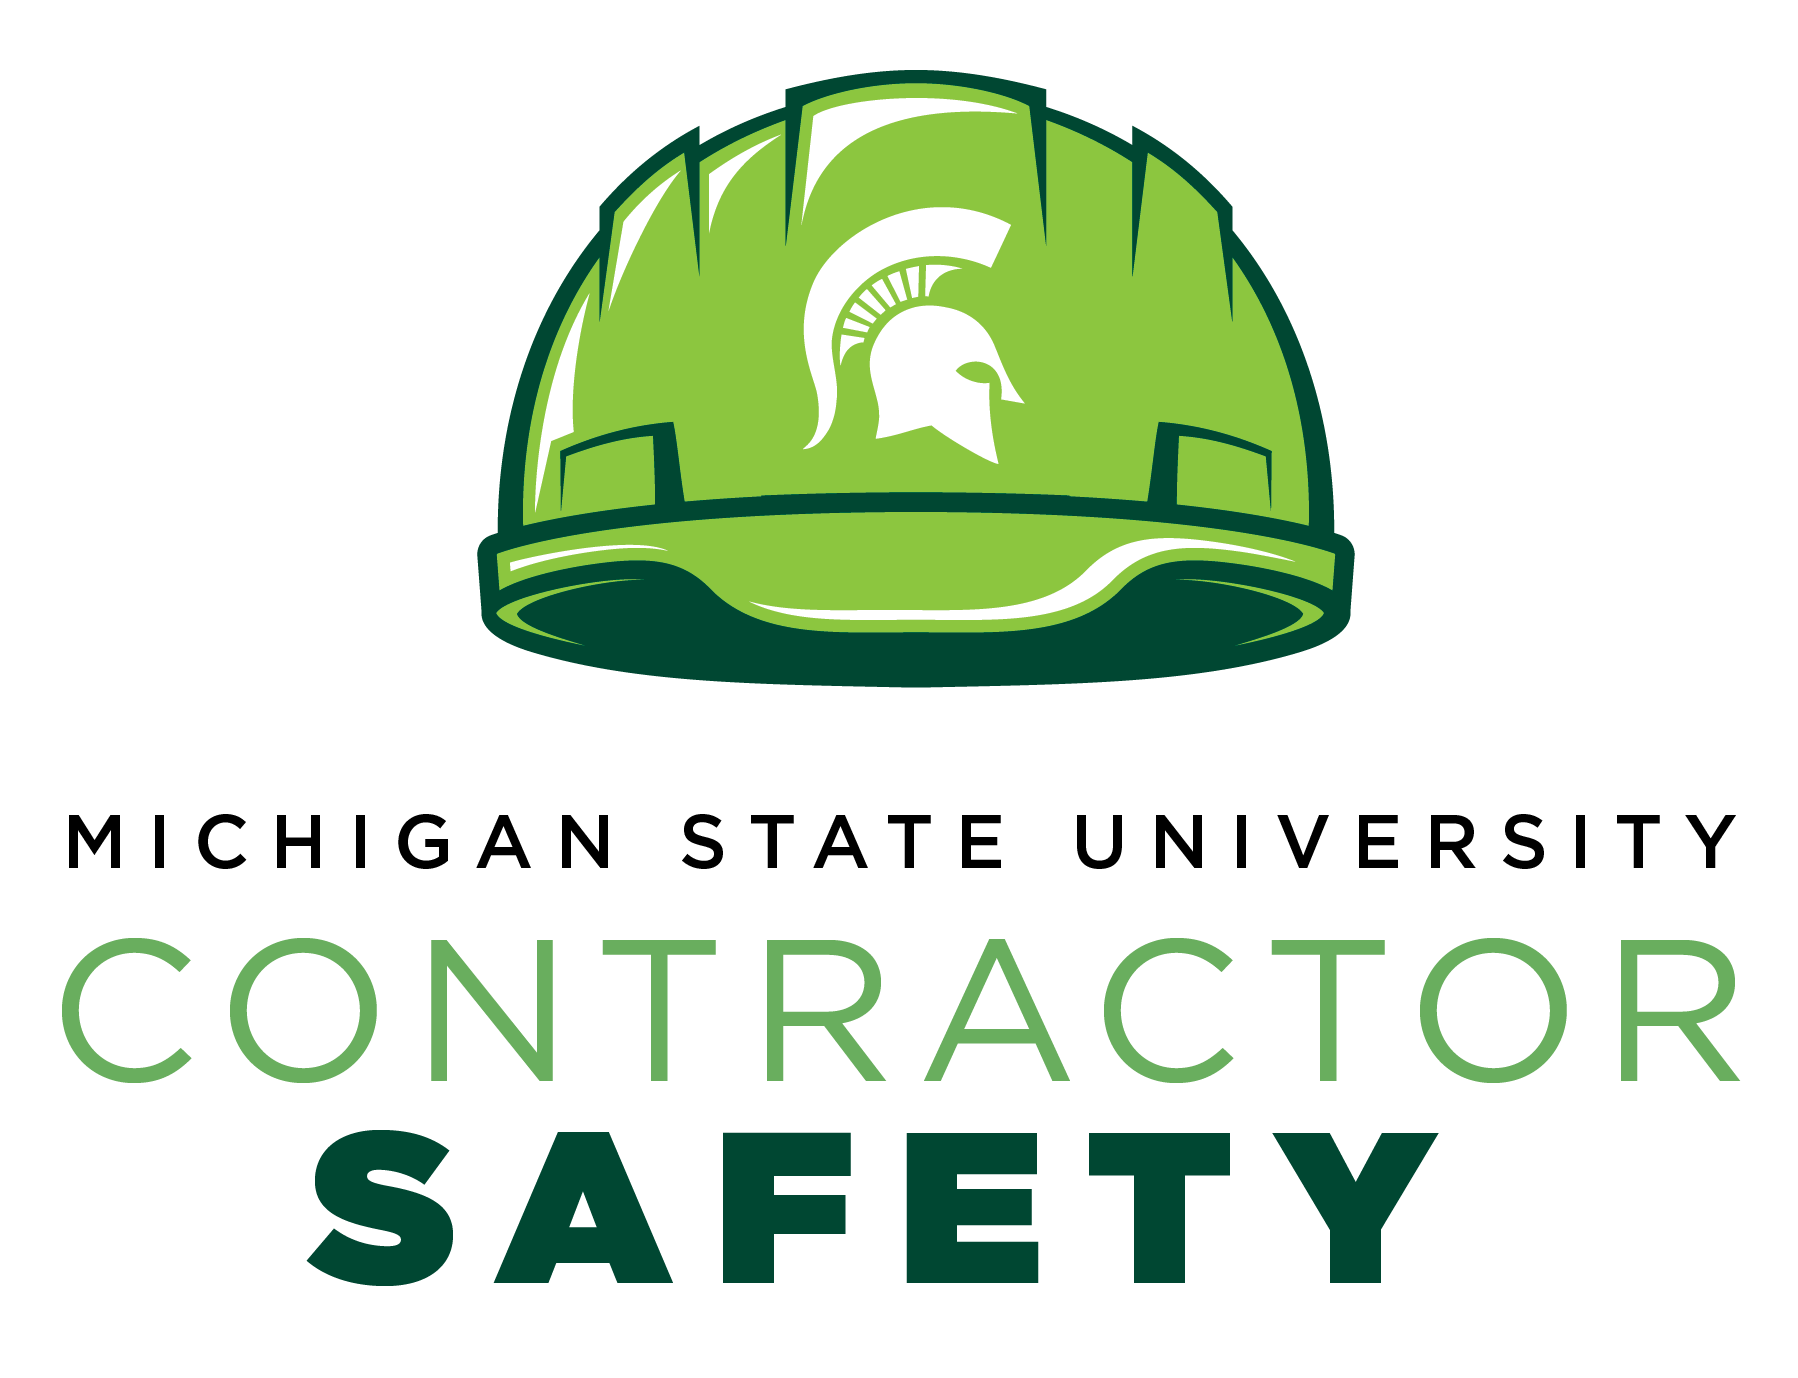 Green safety helmet with spartan helmet and words "Contractor Safety"